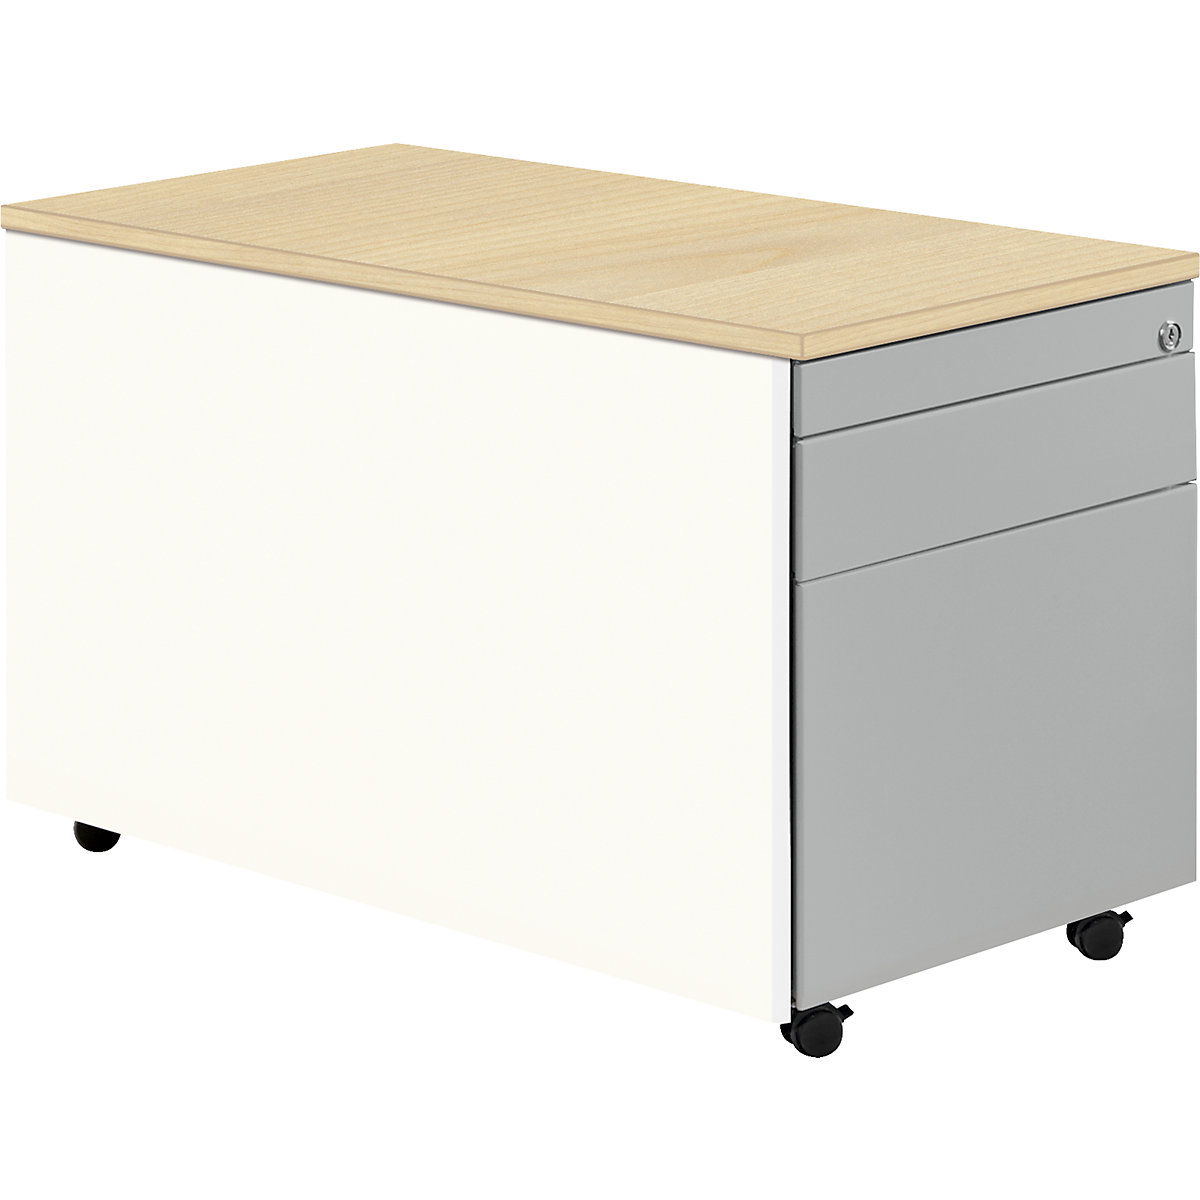 Drawer pedestal with castors – mauser, HxD 529 x 800 mm, 1 drawer, 1 suspension file drawer, pure white / white aluminium / maple-5